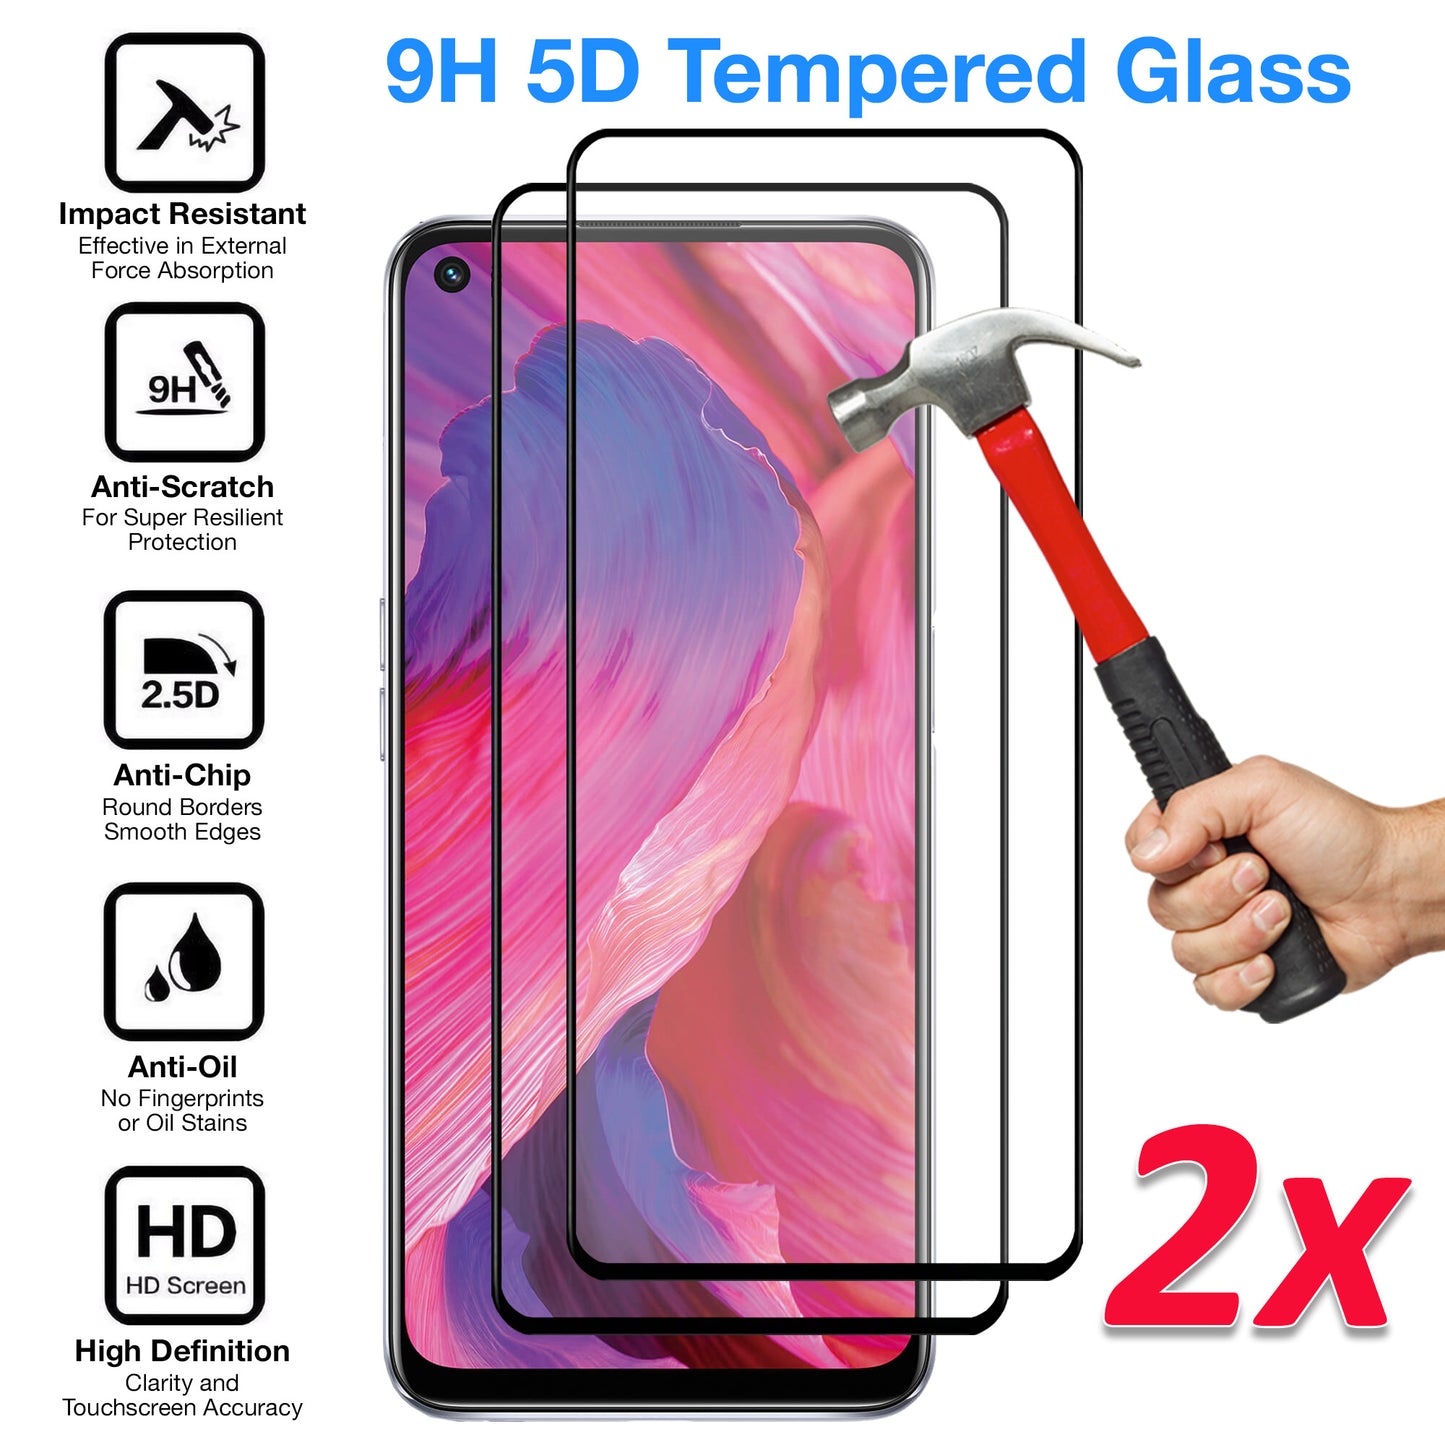 [2 Pack] MEZON Full Coverage OPPO A94 5G Tempered Glass Crystal Clear Premium 9H HD Screen Protector (OPPO A94 5G, 9H Full)